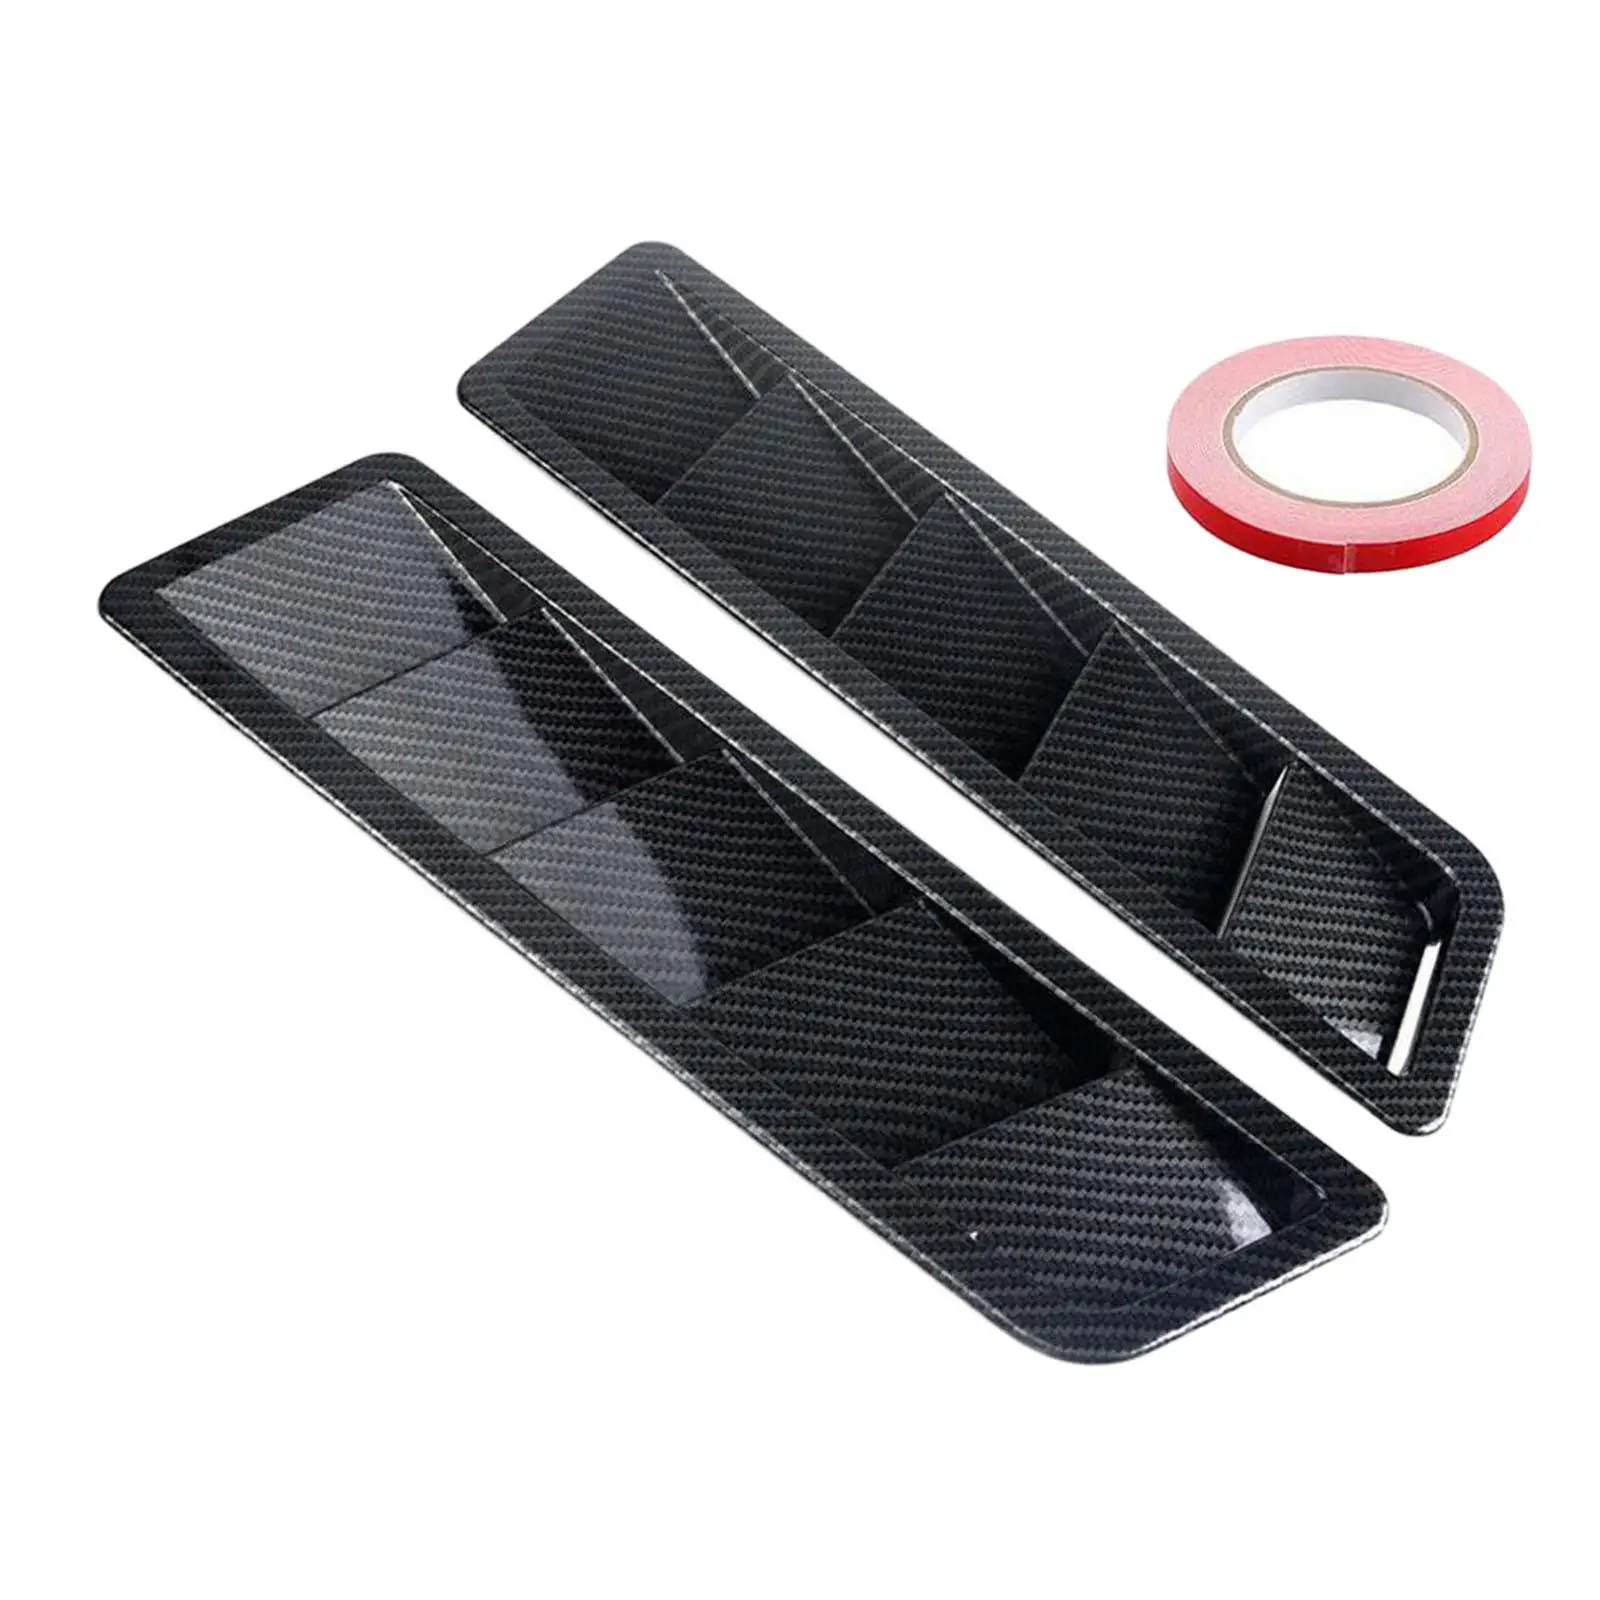 Car Hood Vent Scoop Kit Vents Bonnet Cover Air Flow Intake Vehicles Cooling Intakes Universial Louver for Acceories